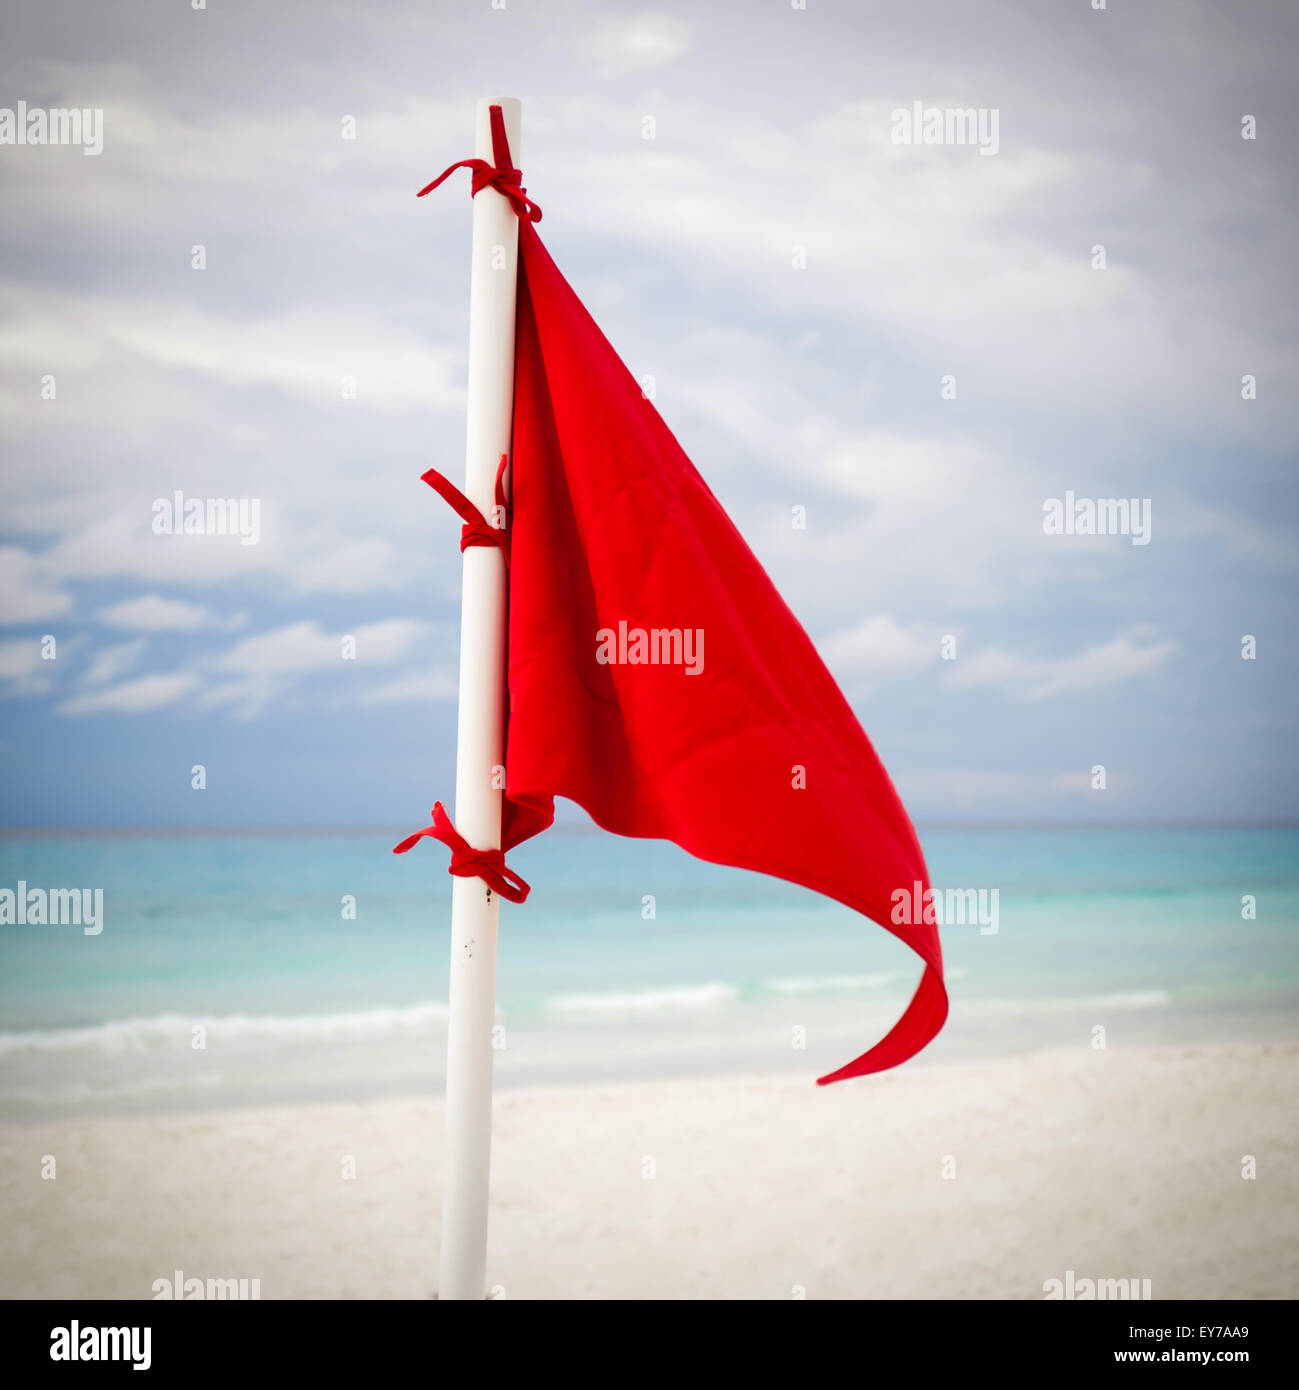 Lifeguard red flag at caribbean beach in bad weather Stock Photo